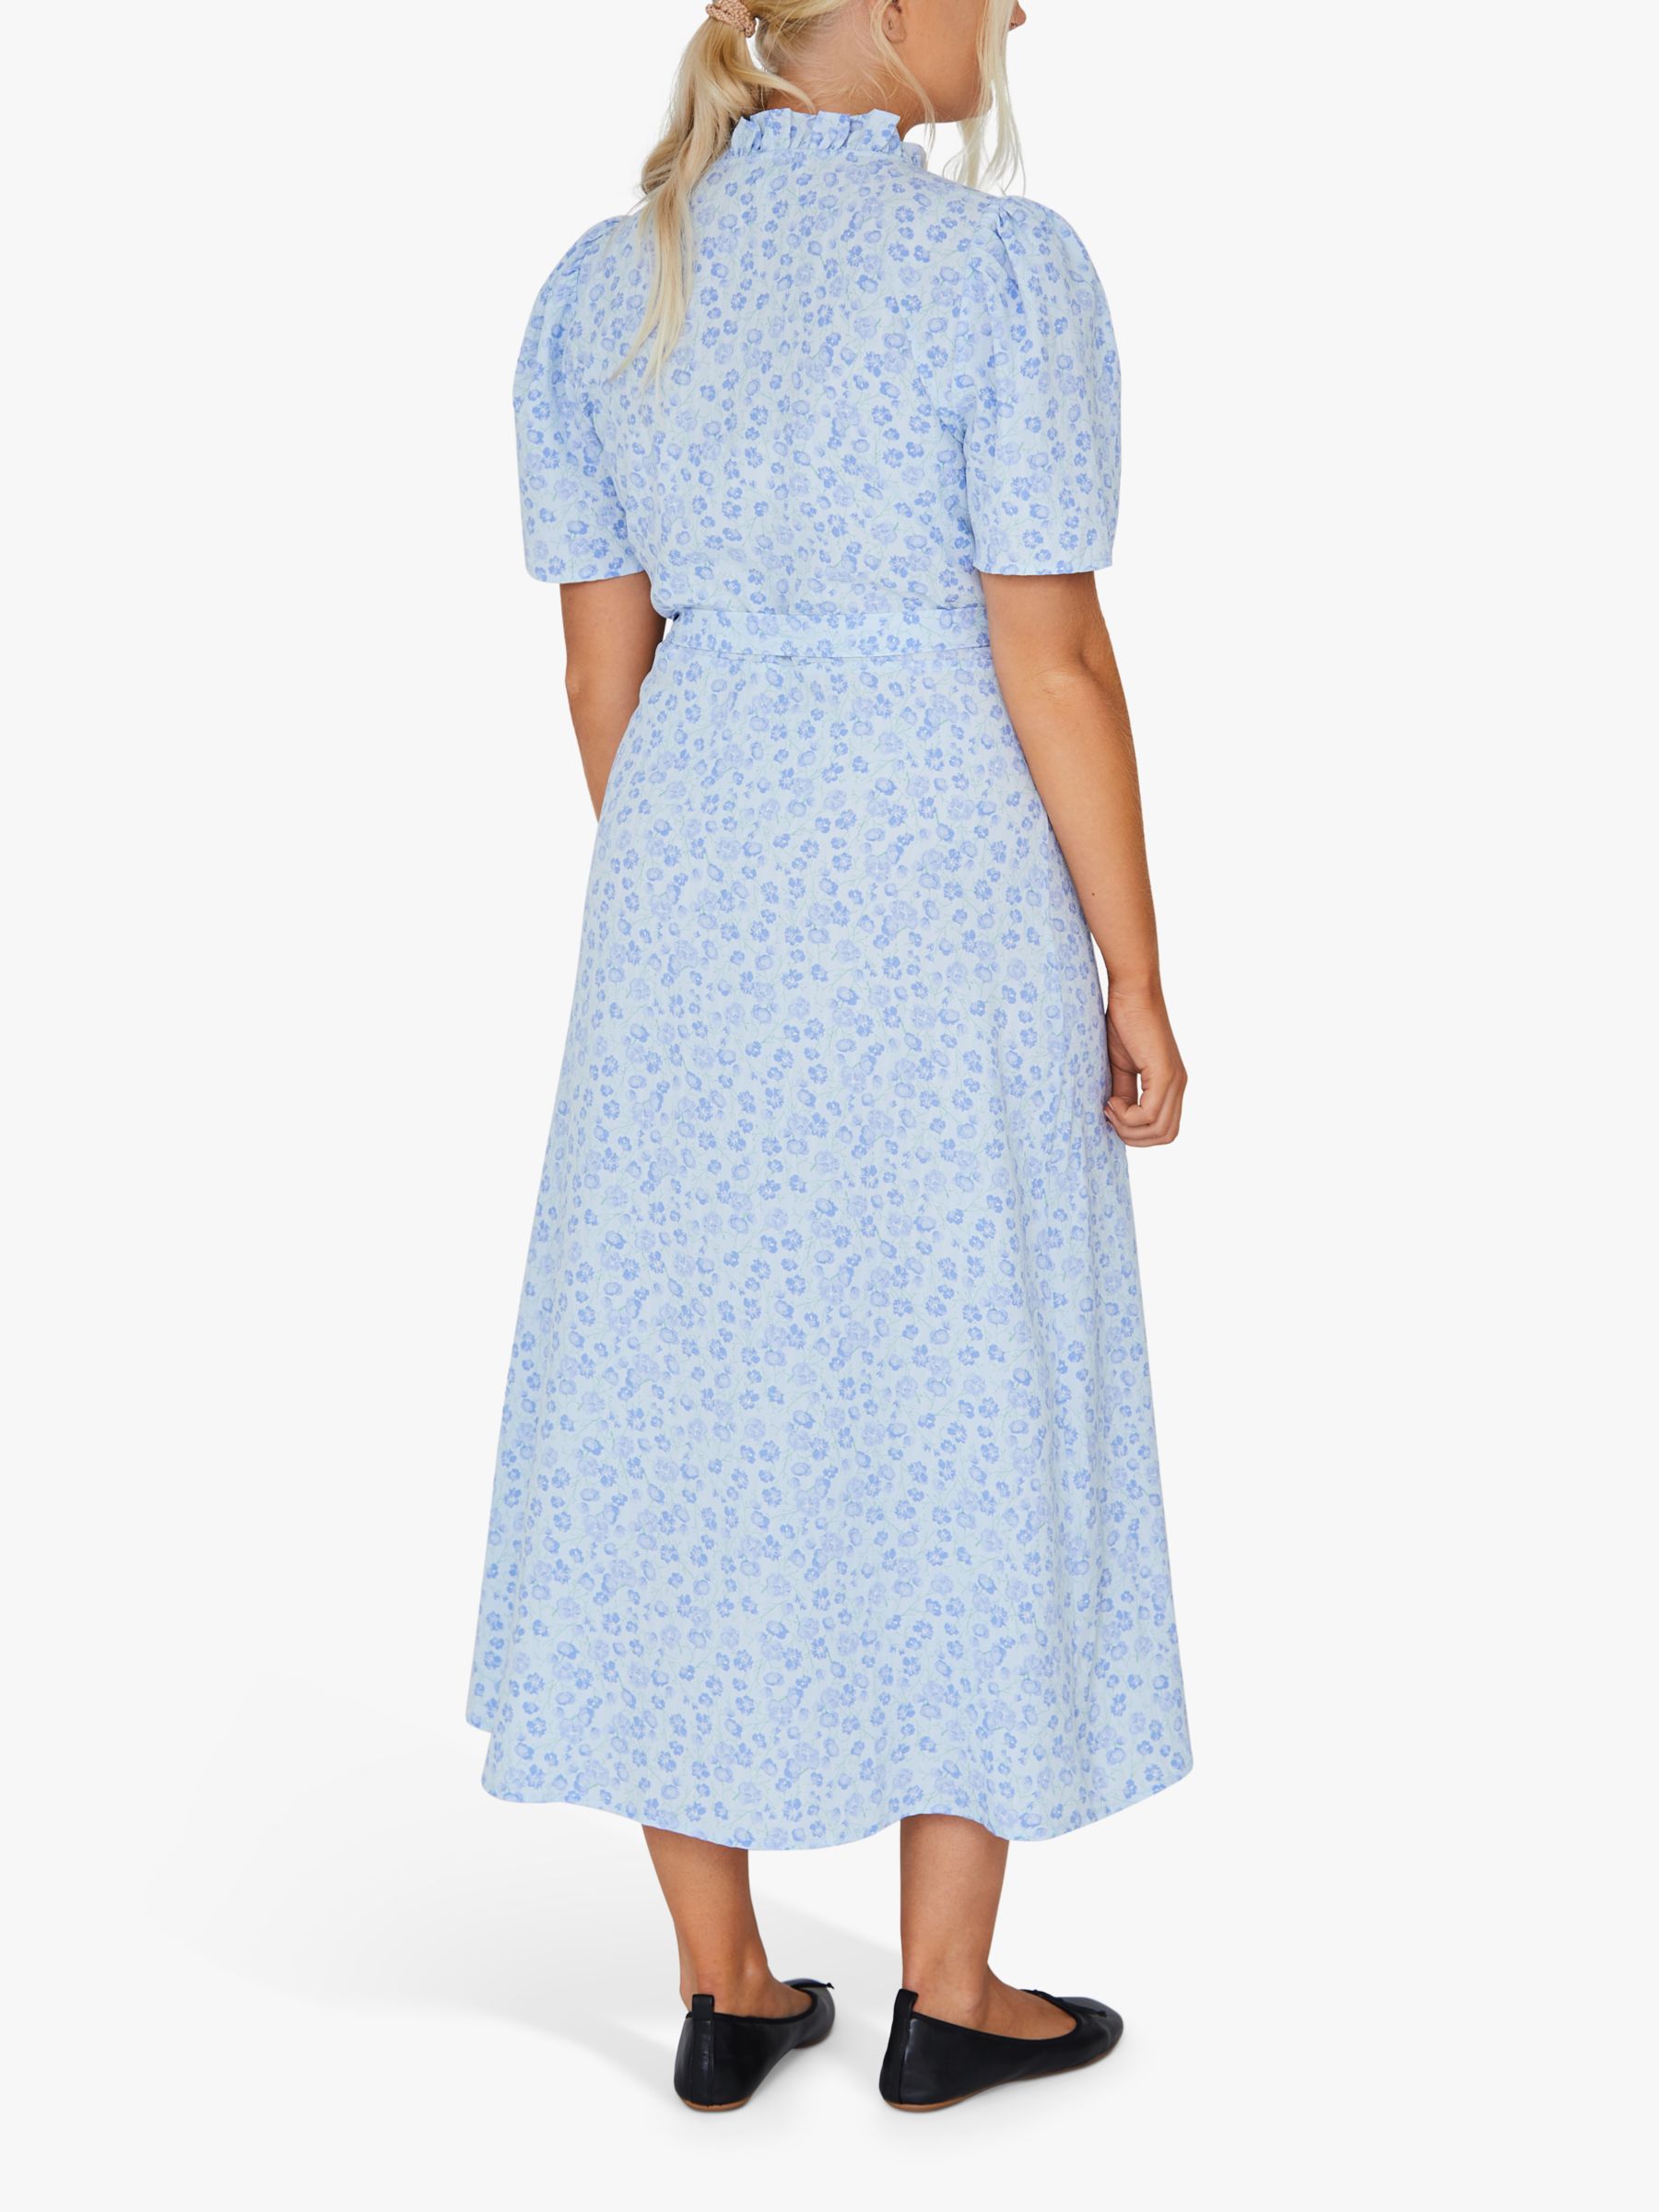 Buy A-VIEW Peony Wrap Dress Online at johnlewis.com